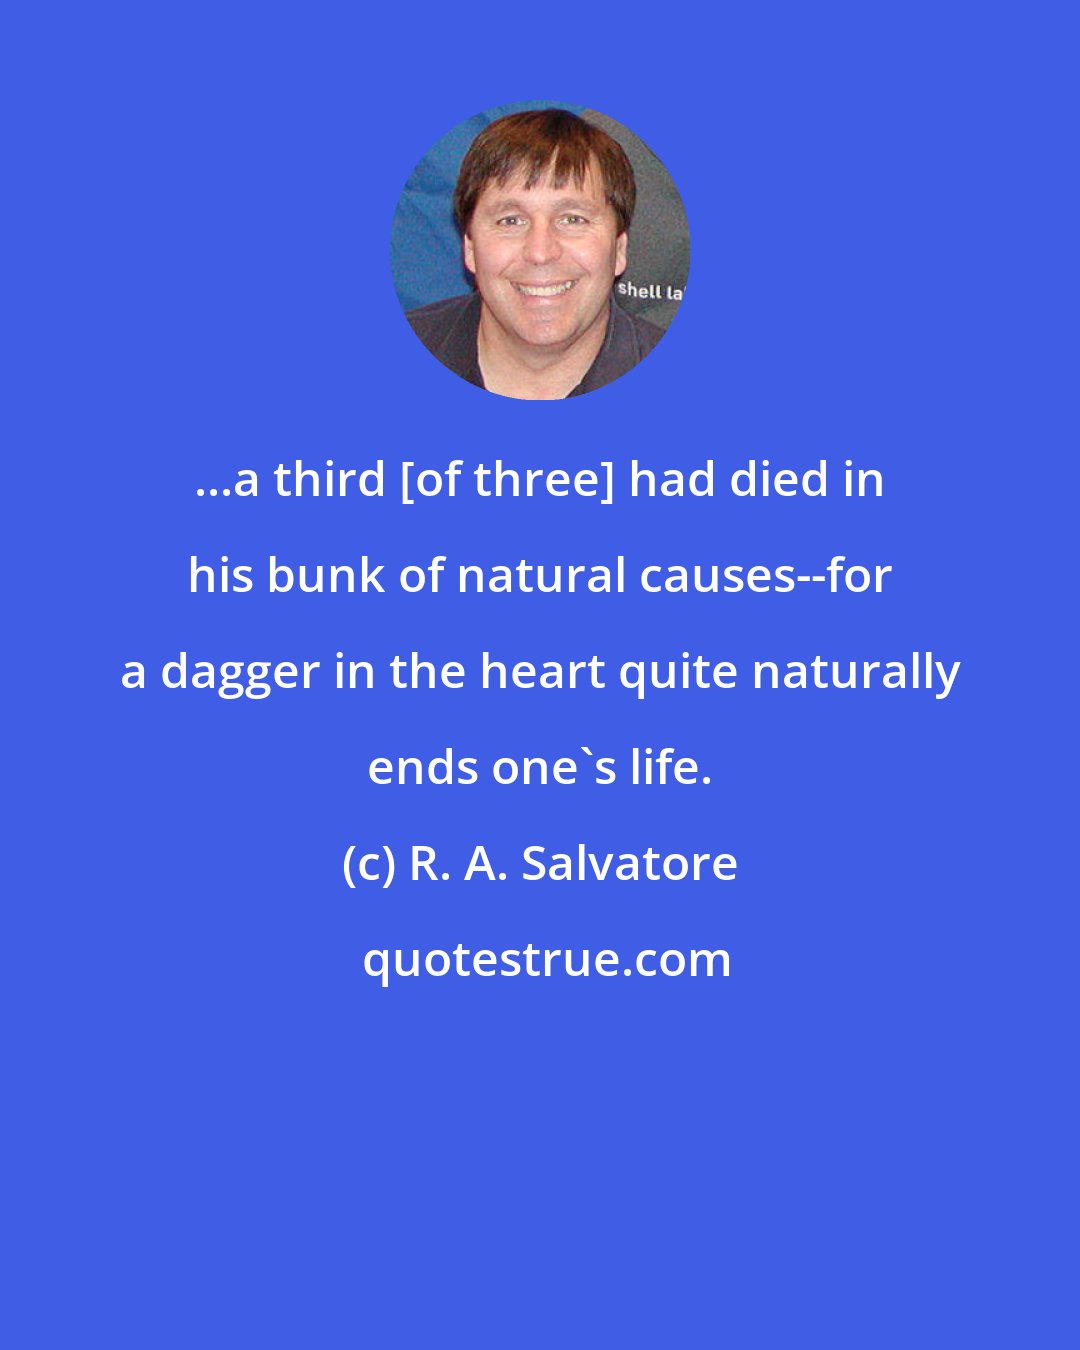 R. A. Salvatore: ...a third [of three] had died in his bunk of natural causes--for a dagger in the heart quite naturally ends one's life.